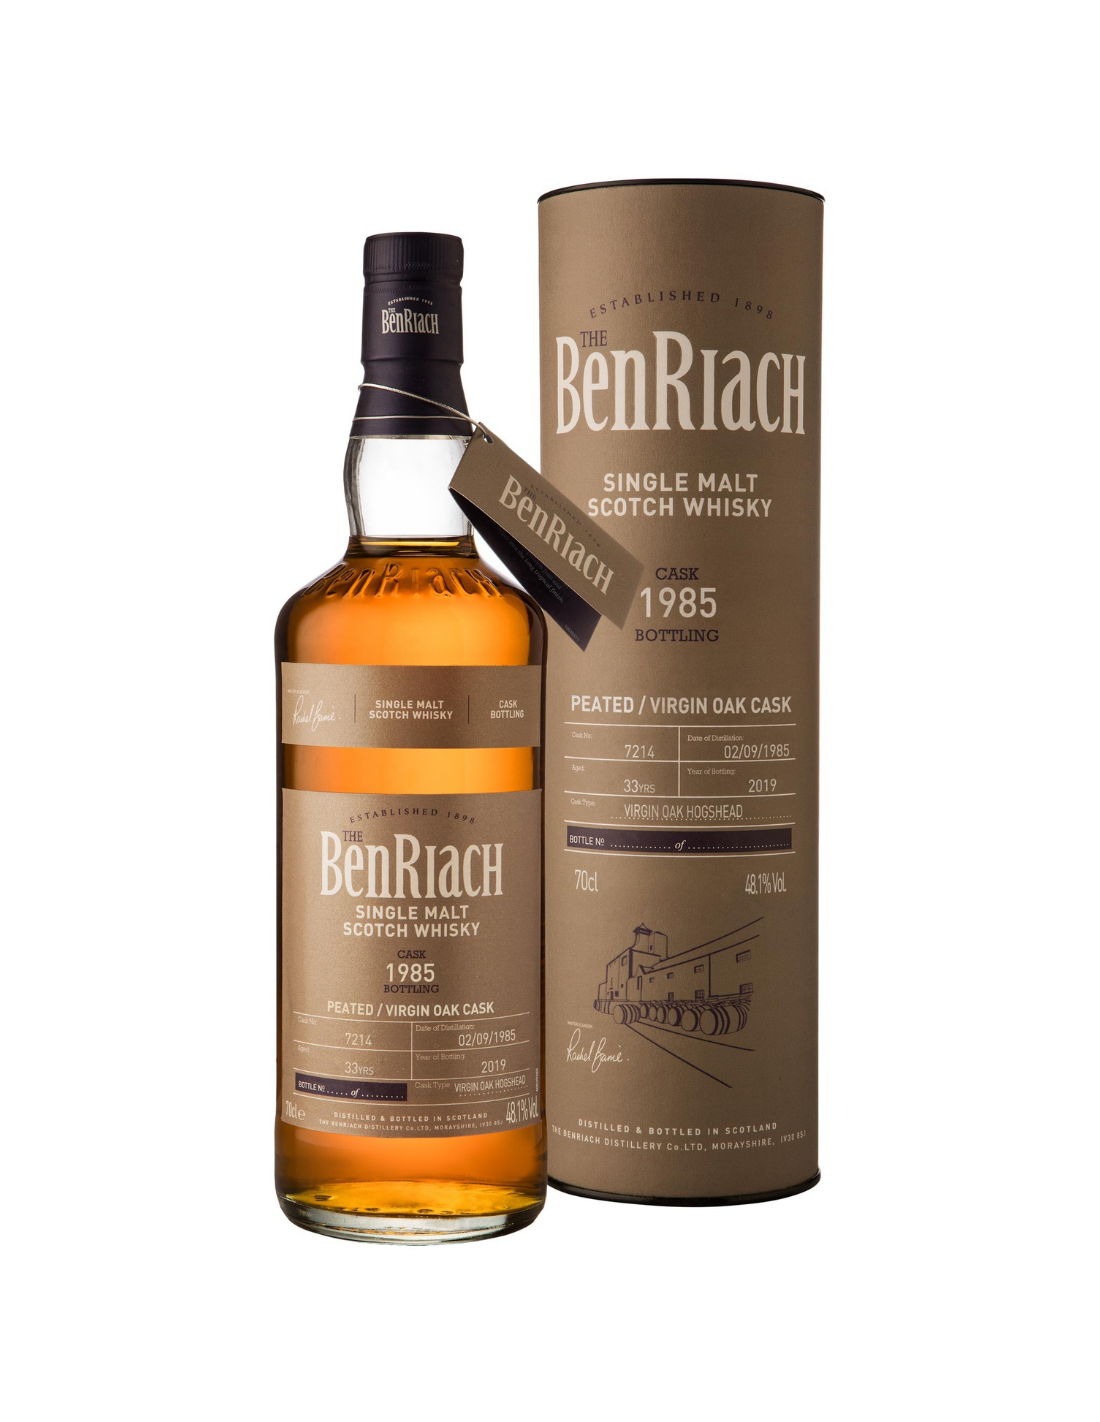 Whisky The Benriach 33 Year Old 1985 Virgin Oak Cask 16, 0.7L, 48.1% alc., Scotia alcooldiscount.ro